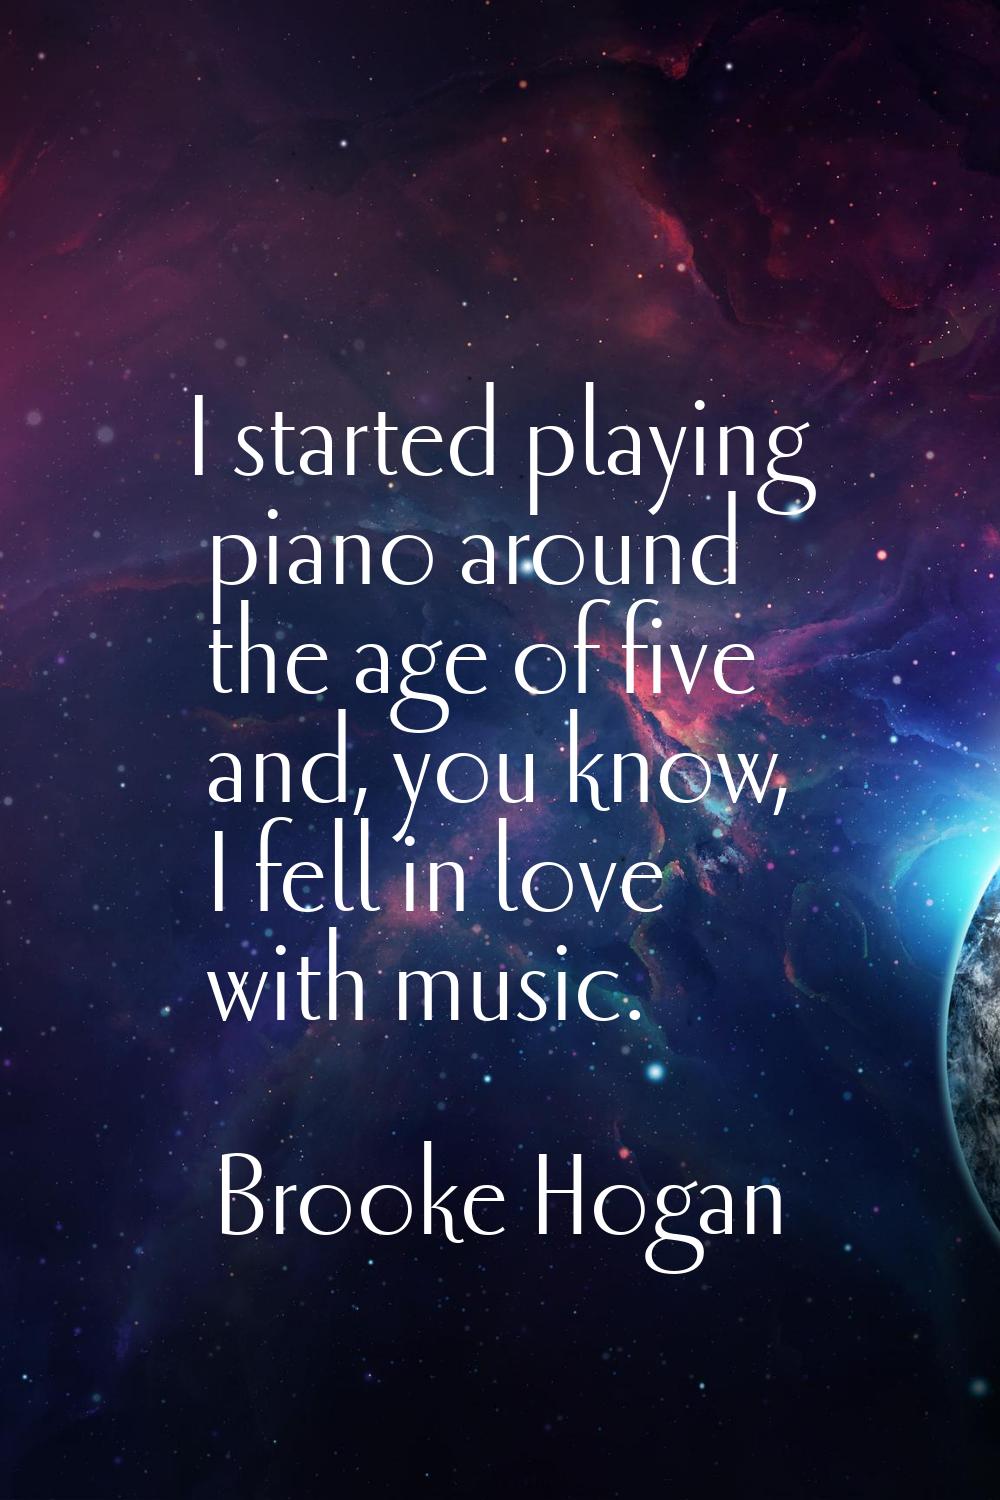 I started playing piano around the age of five and, you know, I fell in love with music.